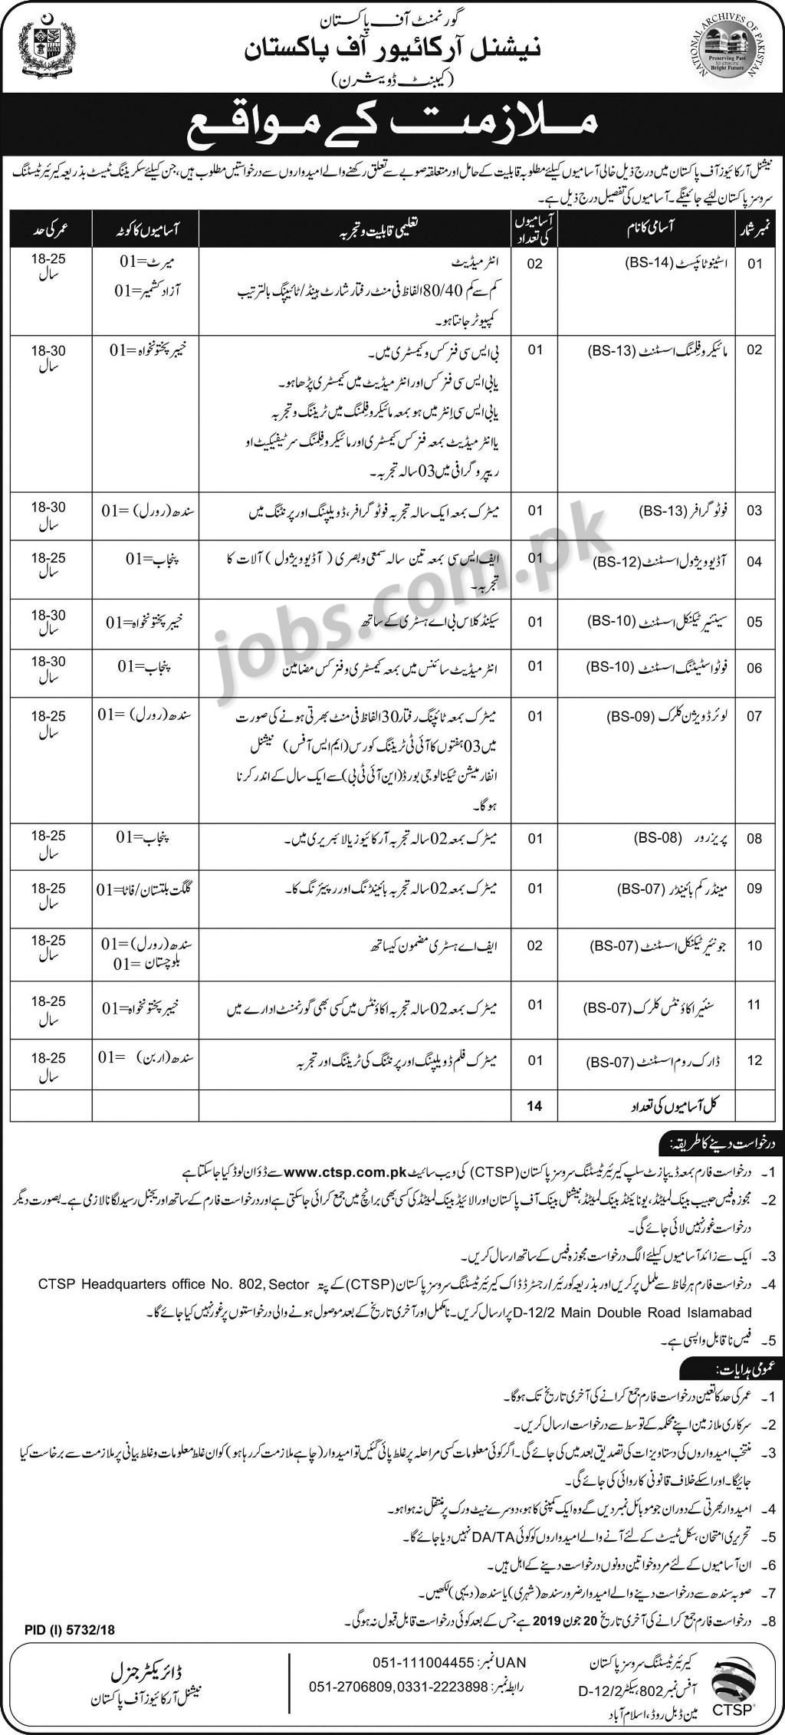 National Archives Of Pakistan Jobs 2019 For 14+ Staff Posts (Download CTSP Form)